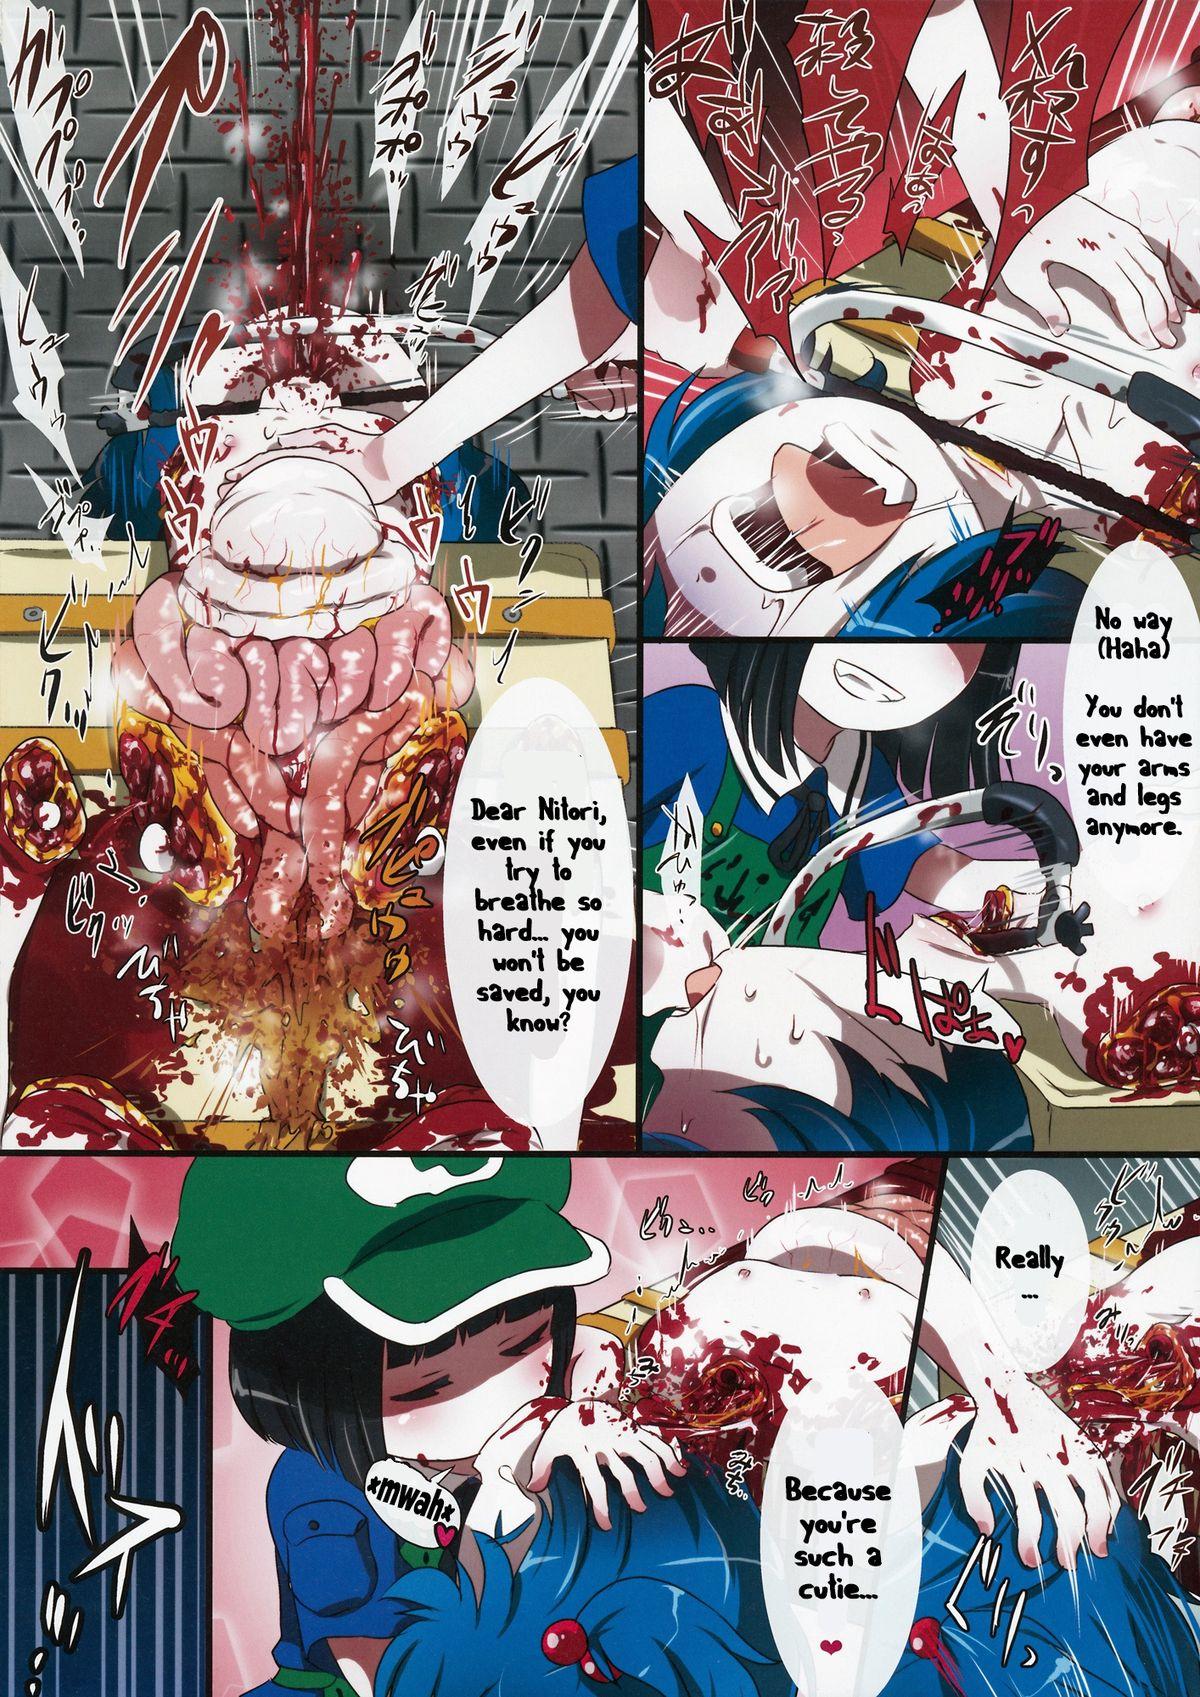 Assfingering 0210564801 - Touhou project Funny - Page 8